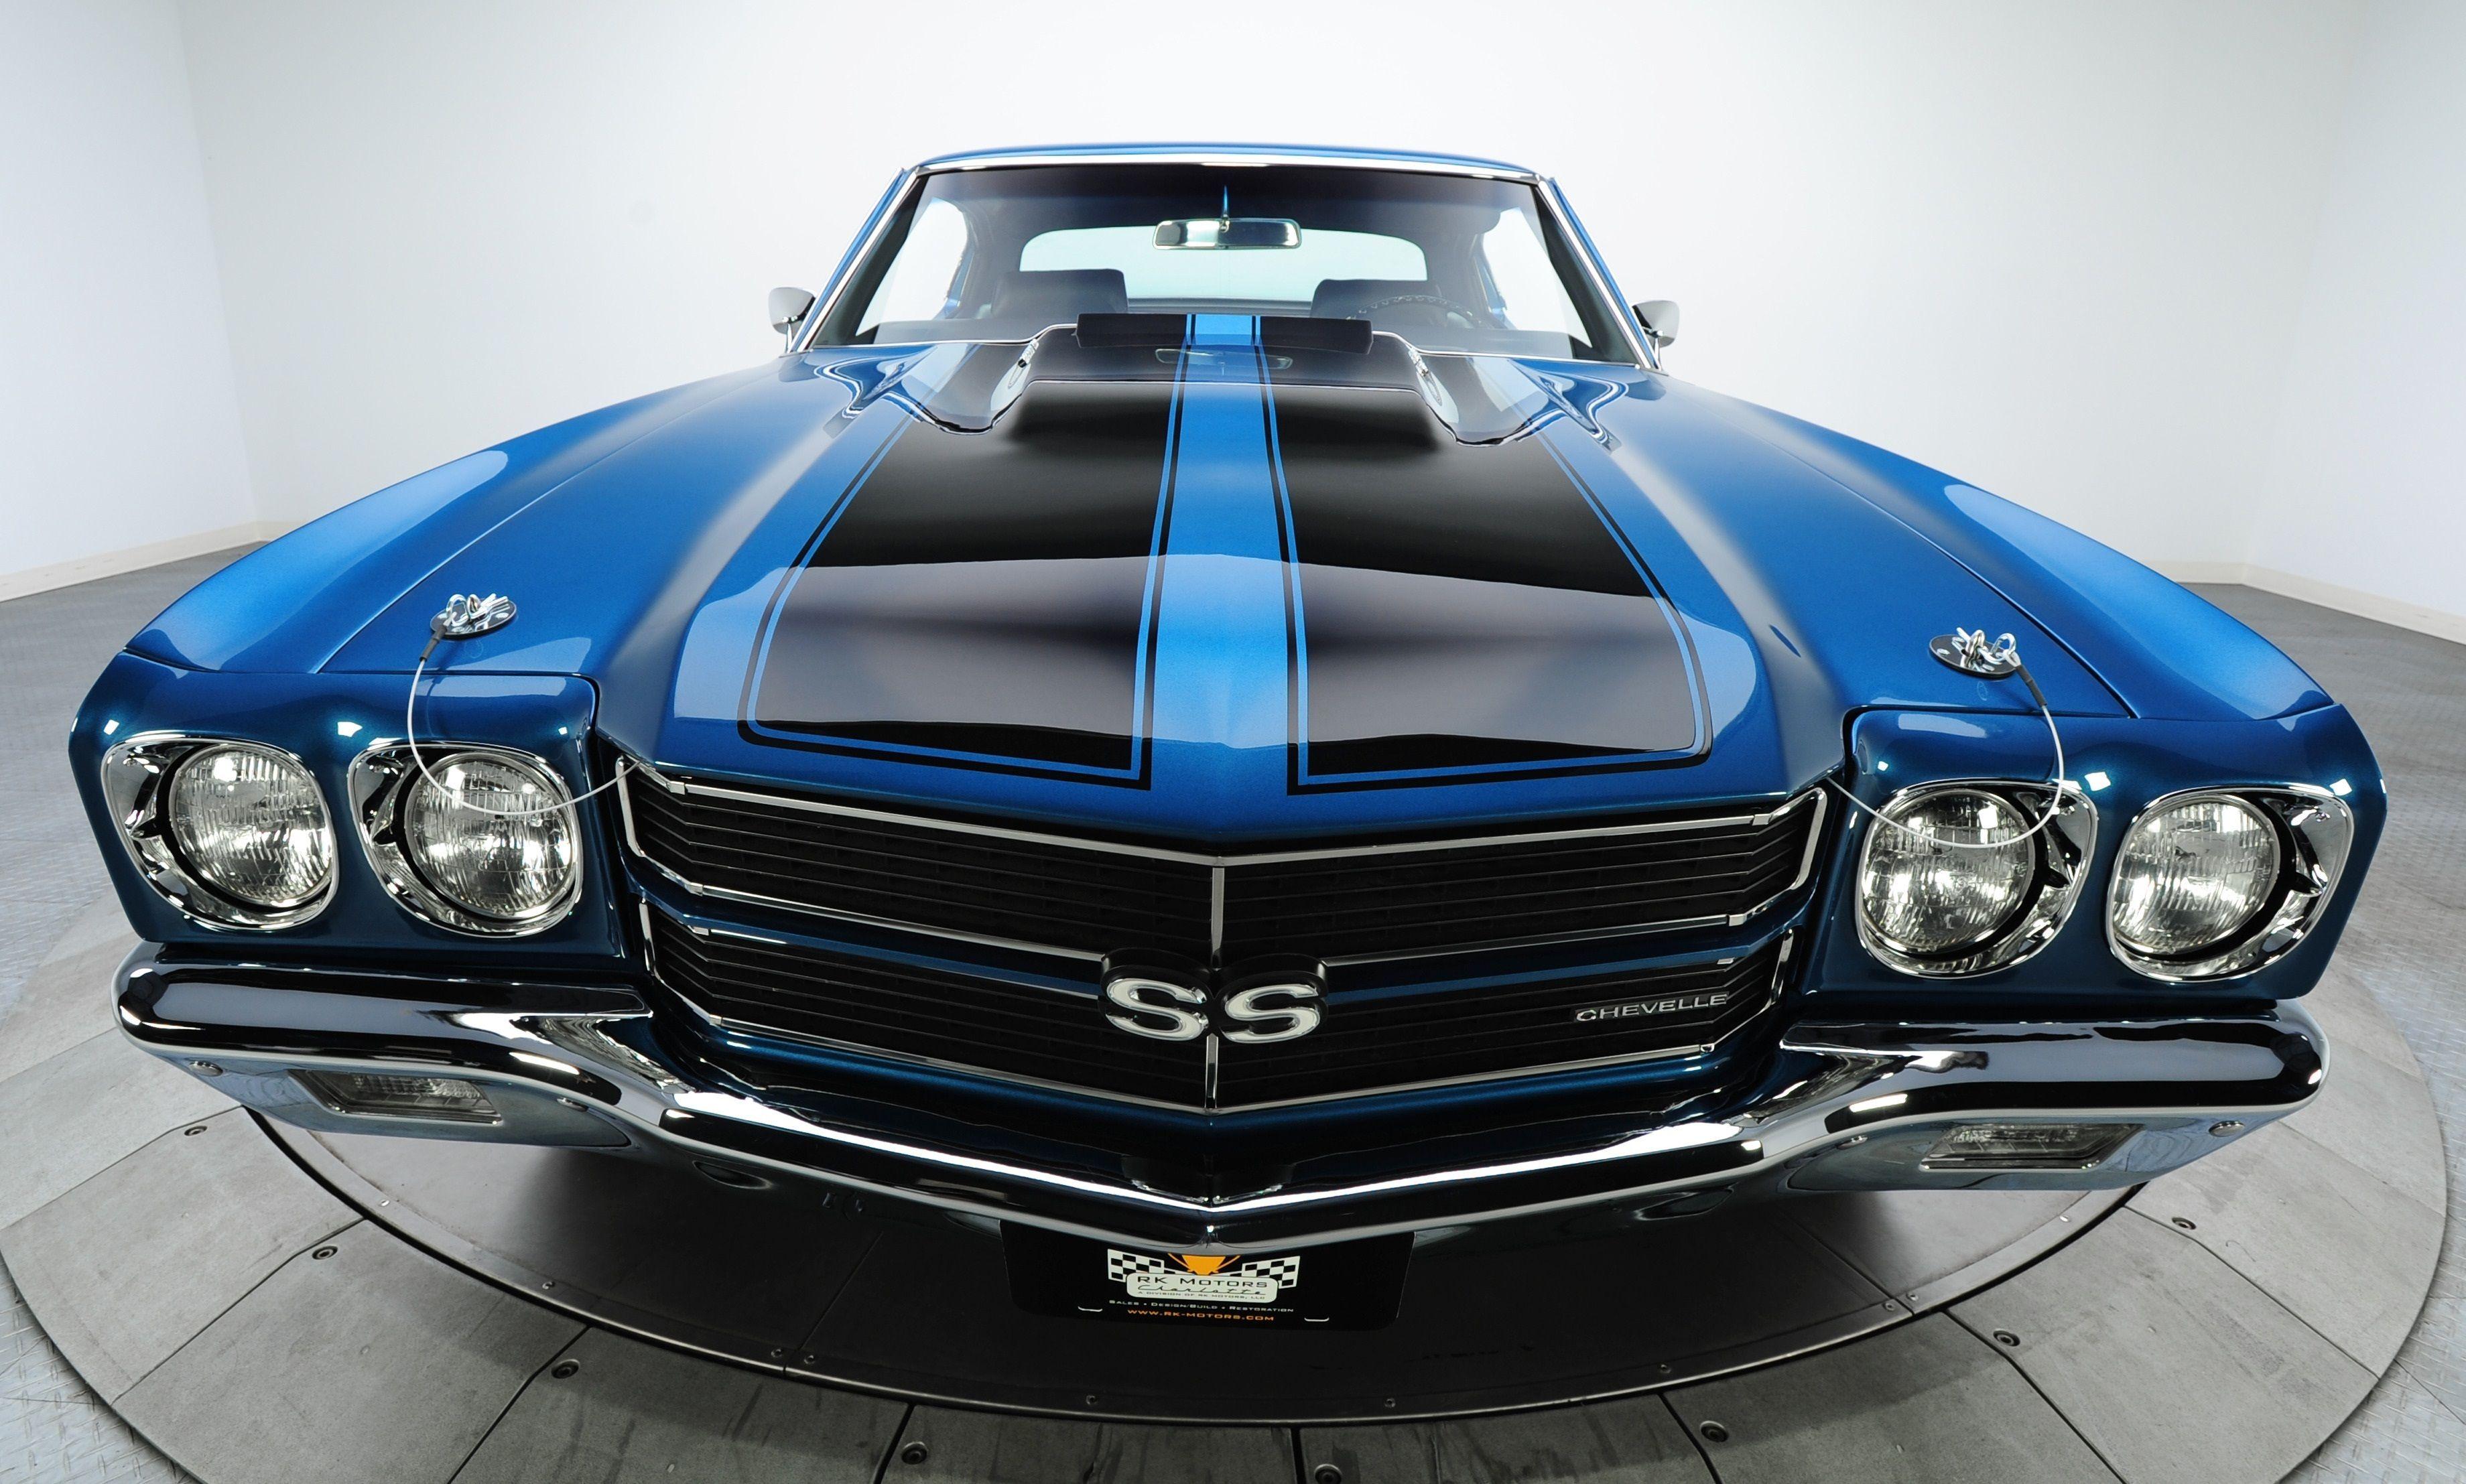 Chevrolet Chevelle SS HD Wallpaper and Background